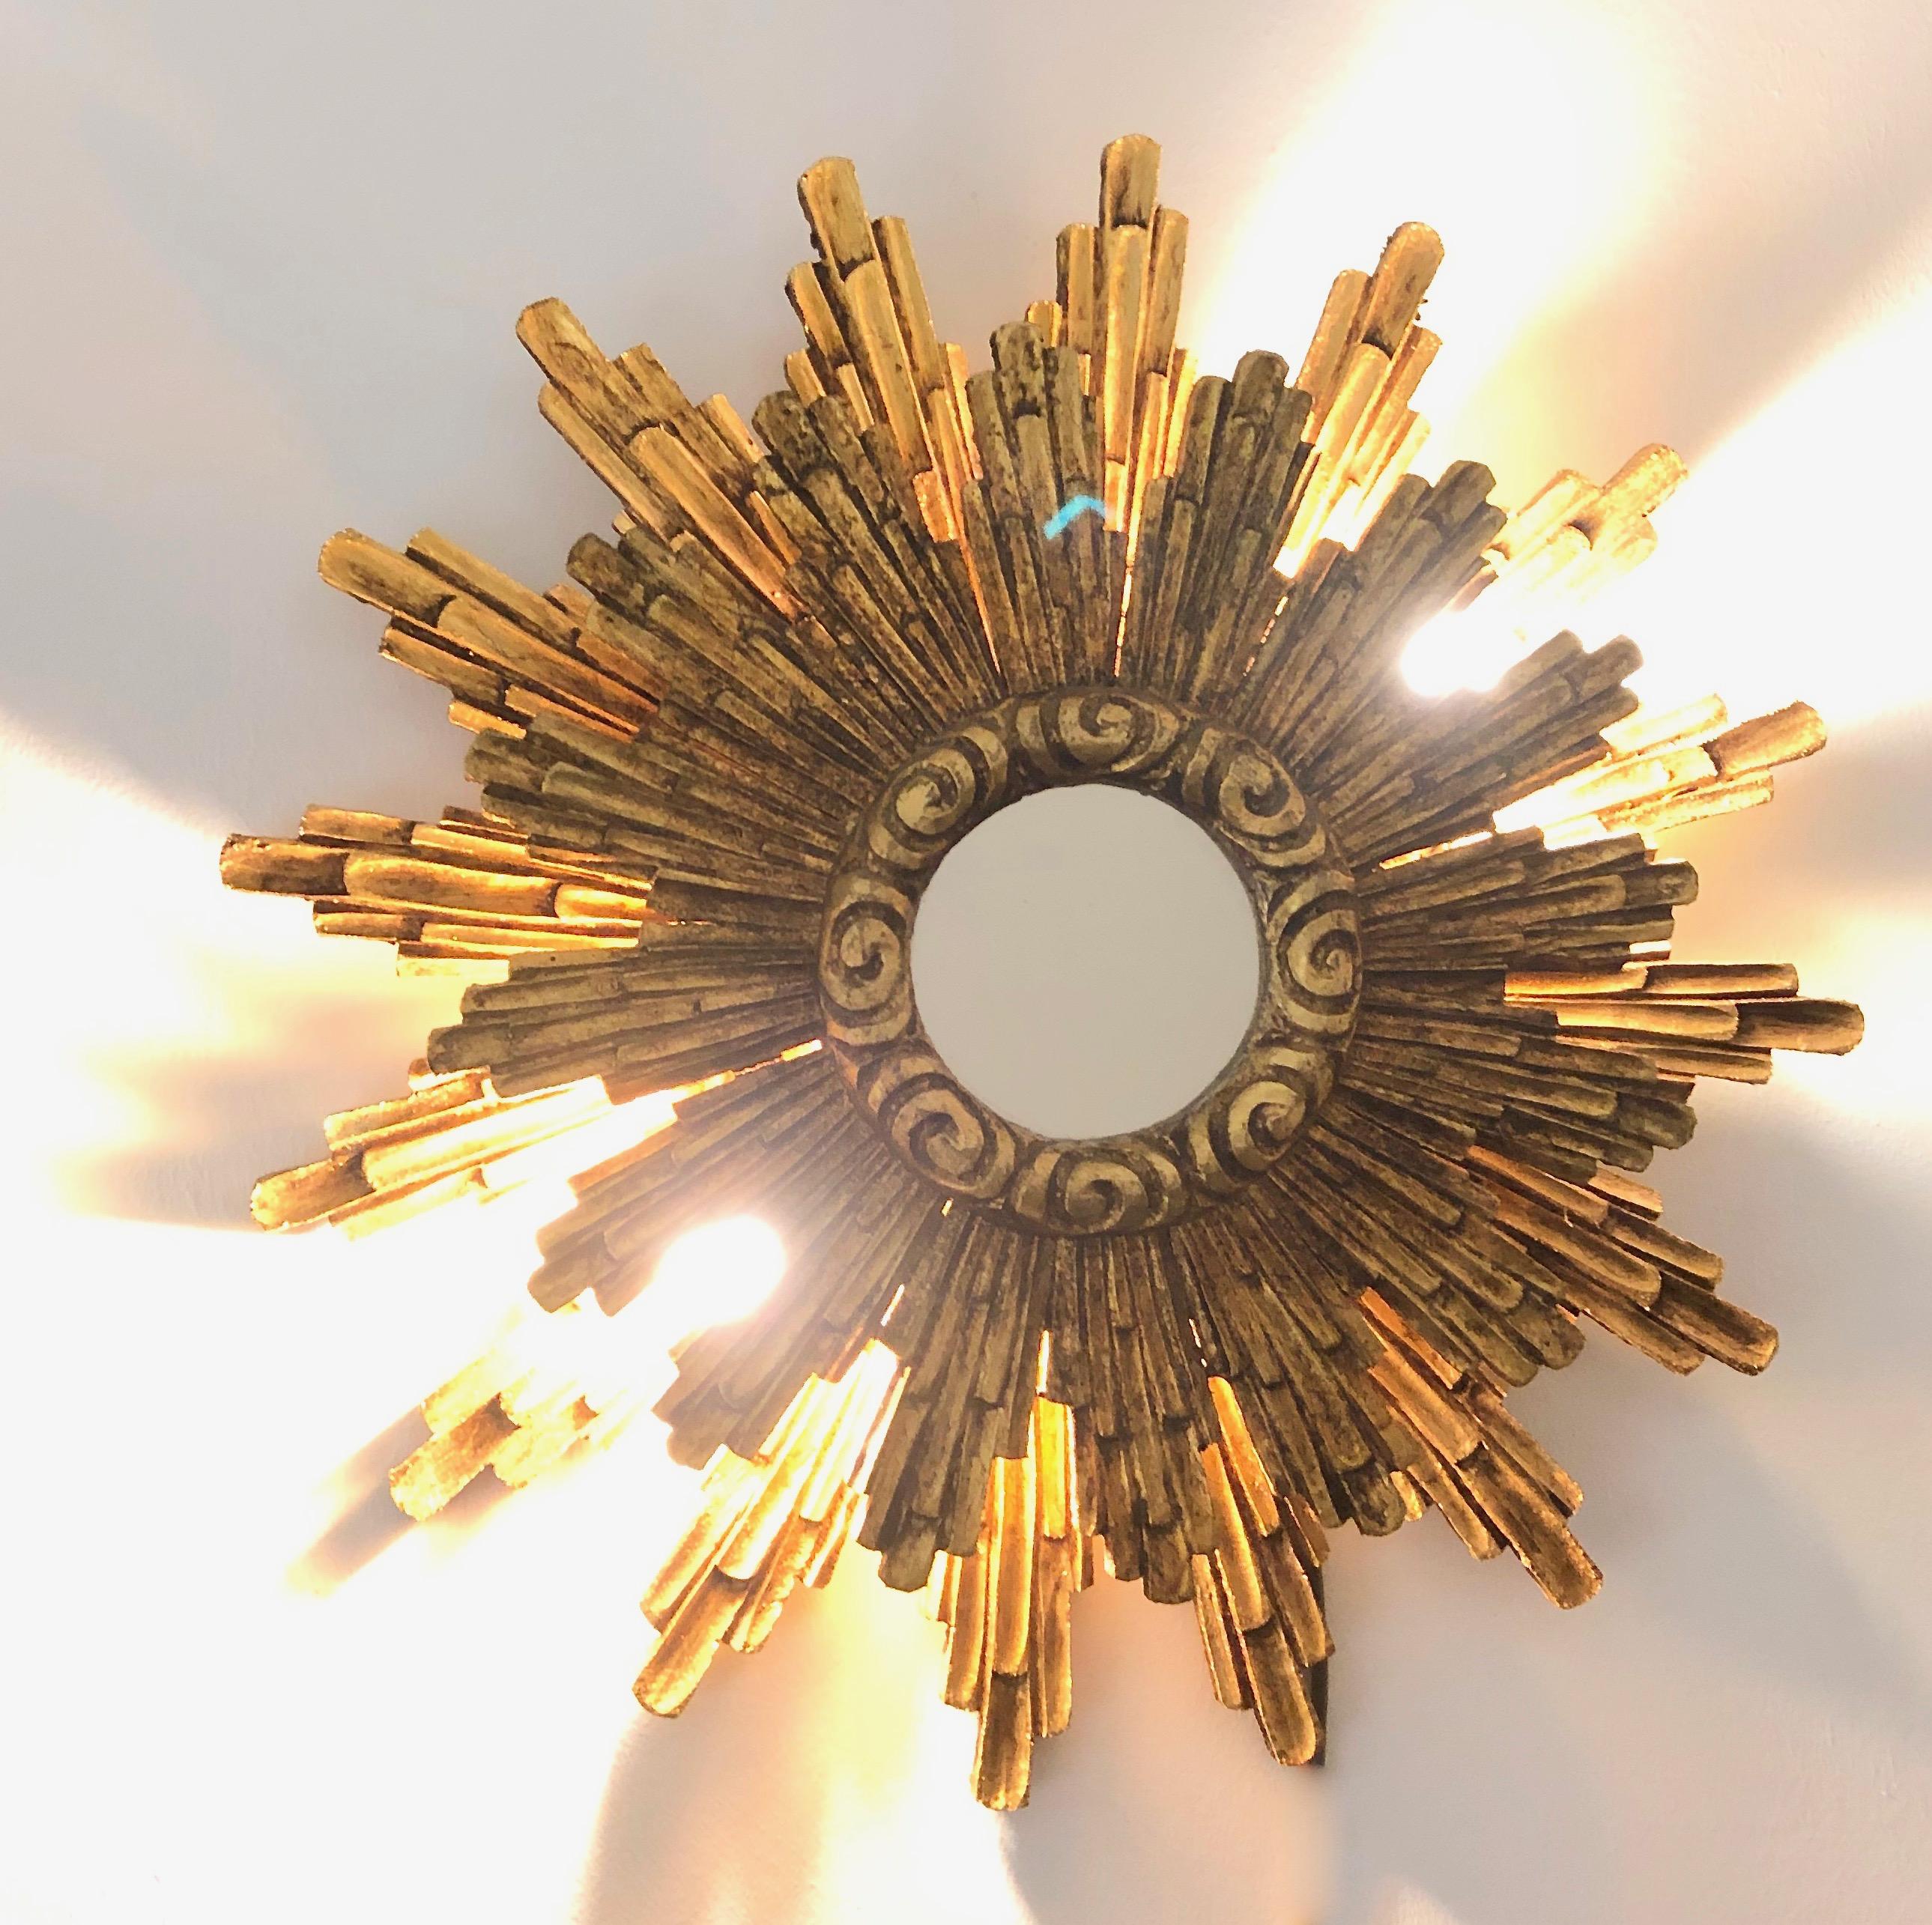 A stunning large starburst mirror, illuminated at the backside with two European E14 / 110 Volt candelabra bulbs, each bulb up to 40 watts. Made of gilded wood. Original as found condition (see all the detailed pictures). It measures approximate 23